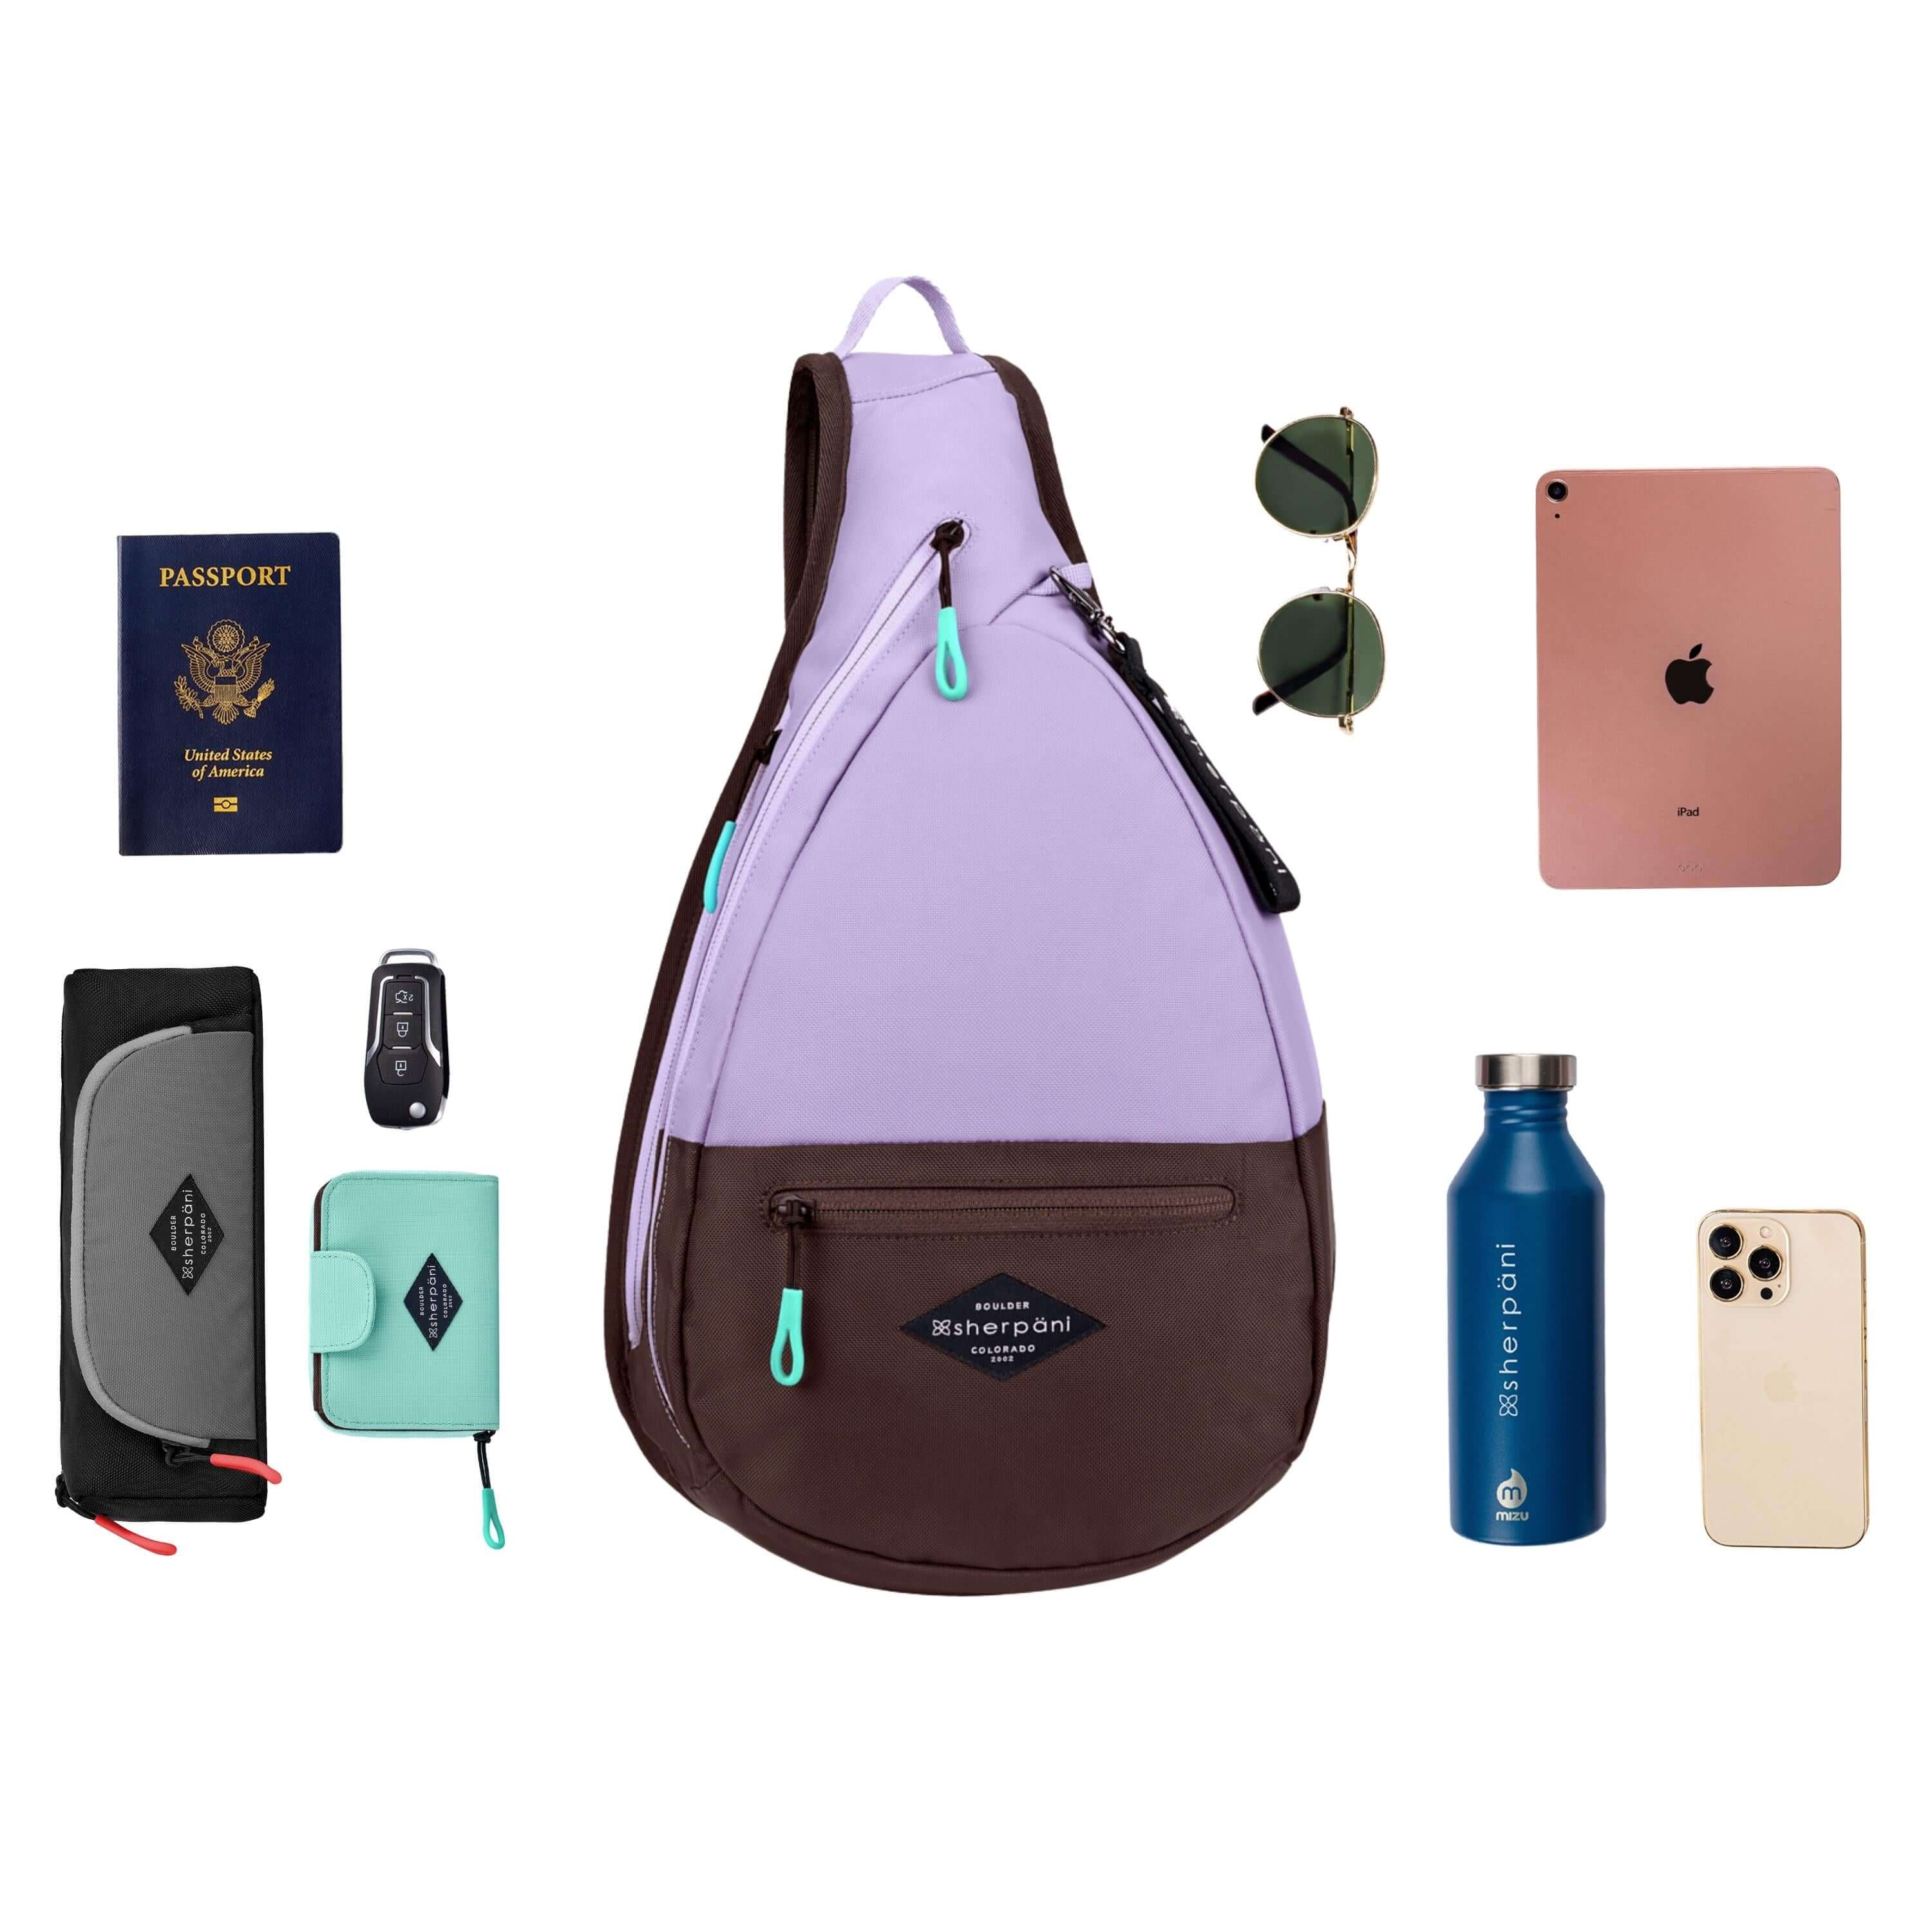 Top view of example items to fill the back. Sherpani's bag, the Esprit in Lavender, lies in the center. It is surrounded by an assortment of items: passport, car key, sunglasses, tablet, water bottle, phone and Sherpani travel accessories the Poet in Stone and the Barcelona in Seagreen. 